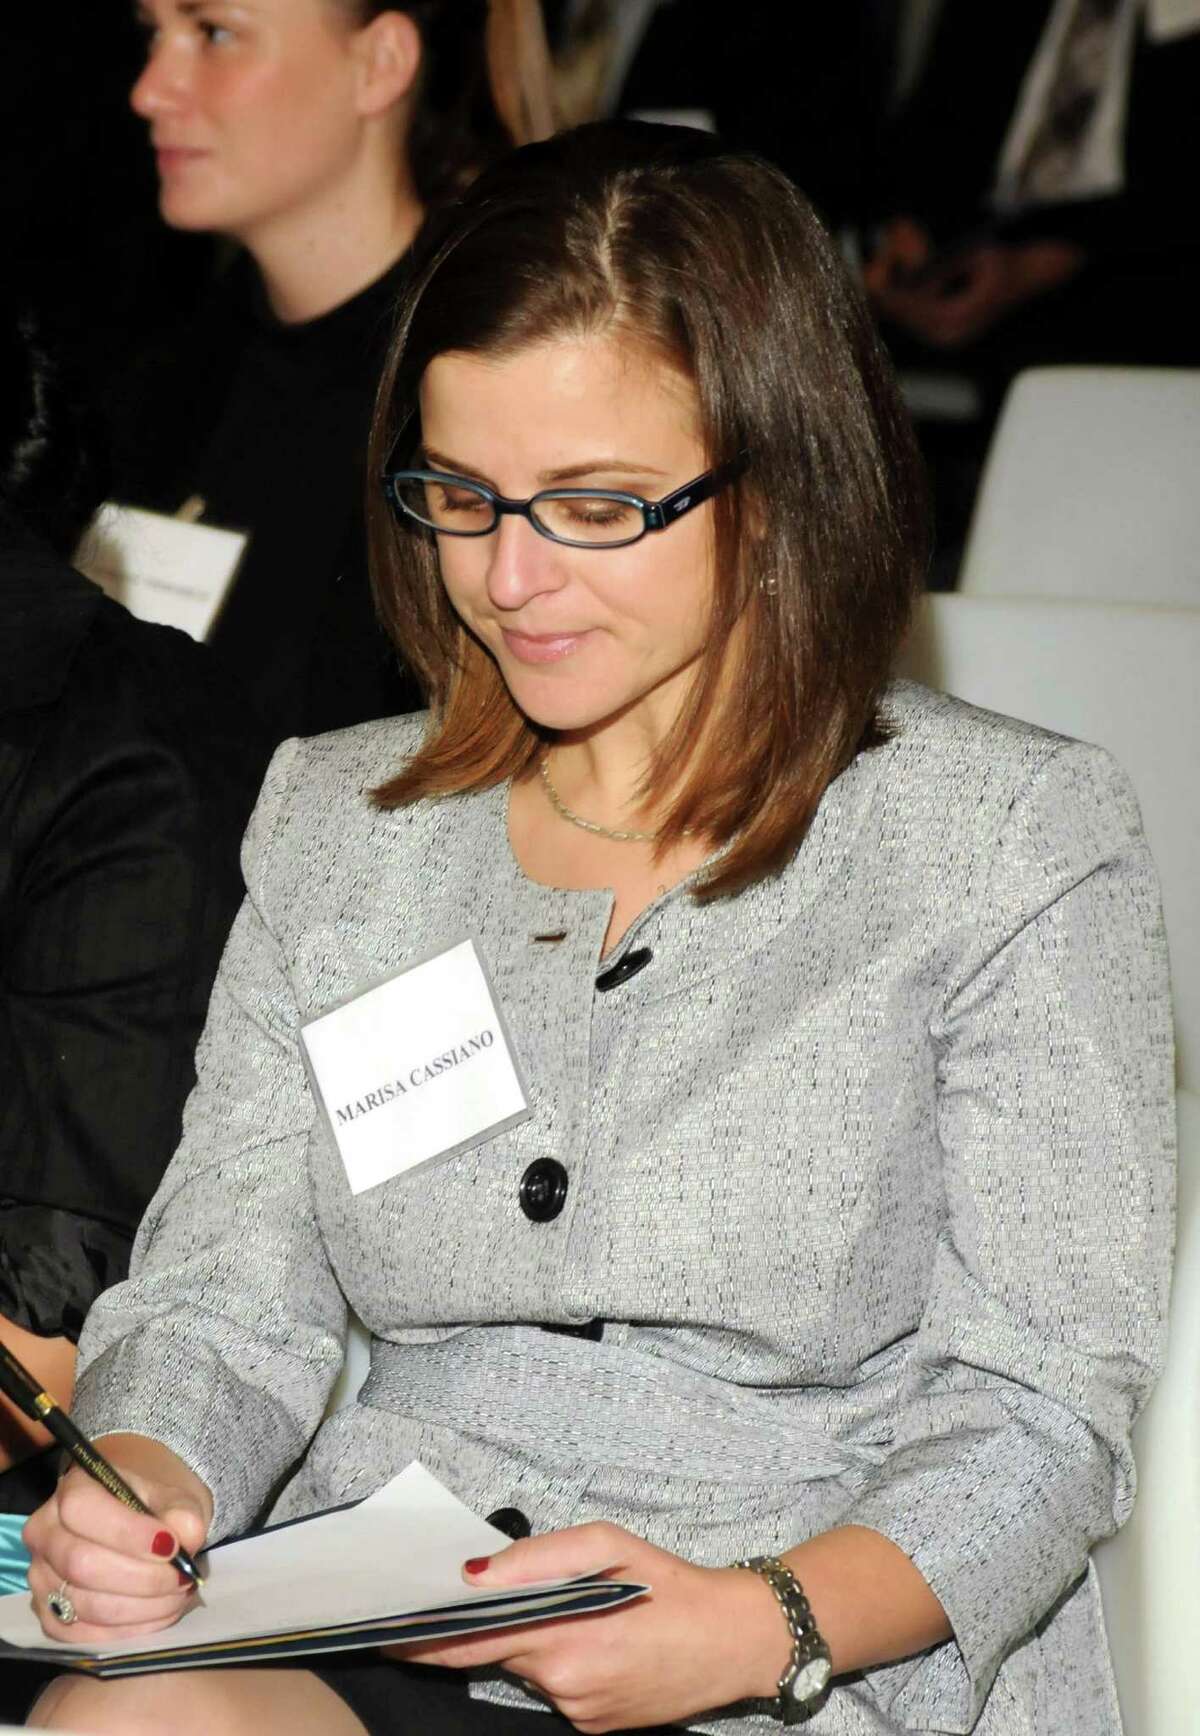 Marissa Cassiano takes notes during a business etiquette dinner that was held at Western Connecticut State University on Tuesday October 9, 2012.